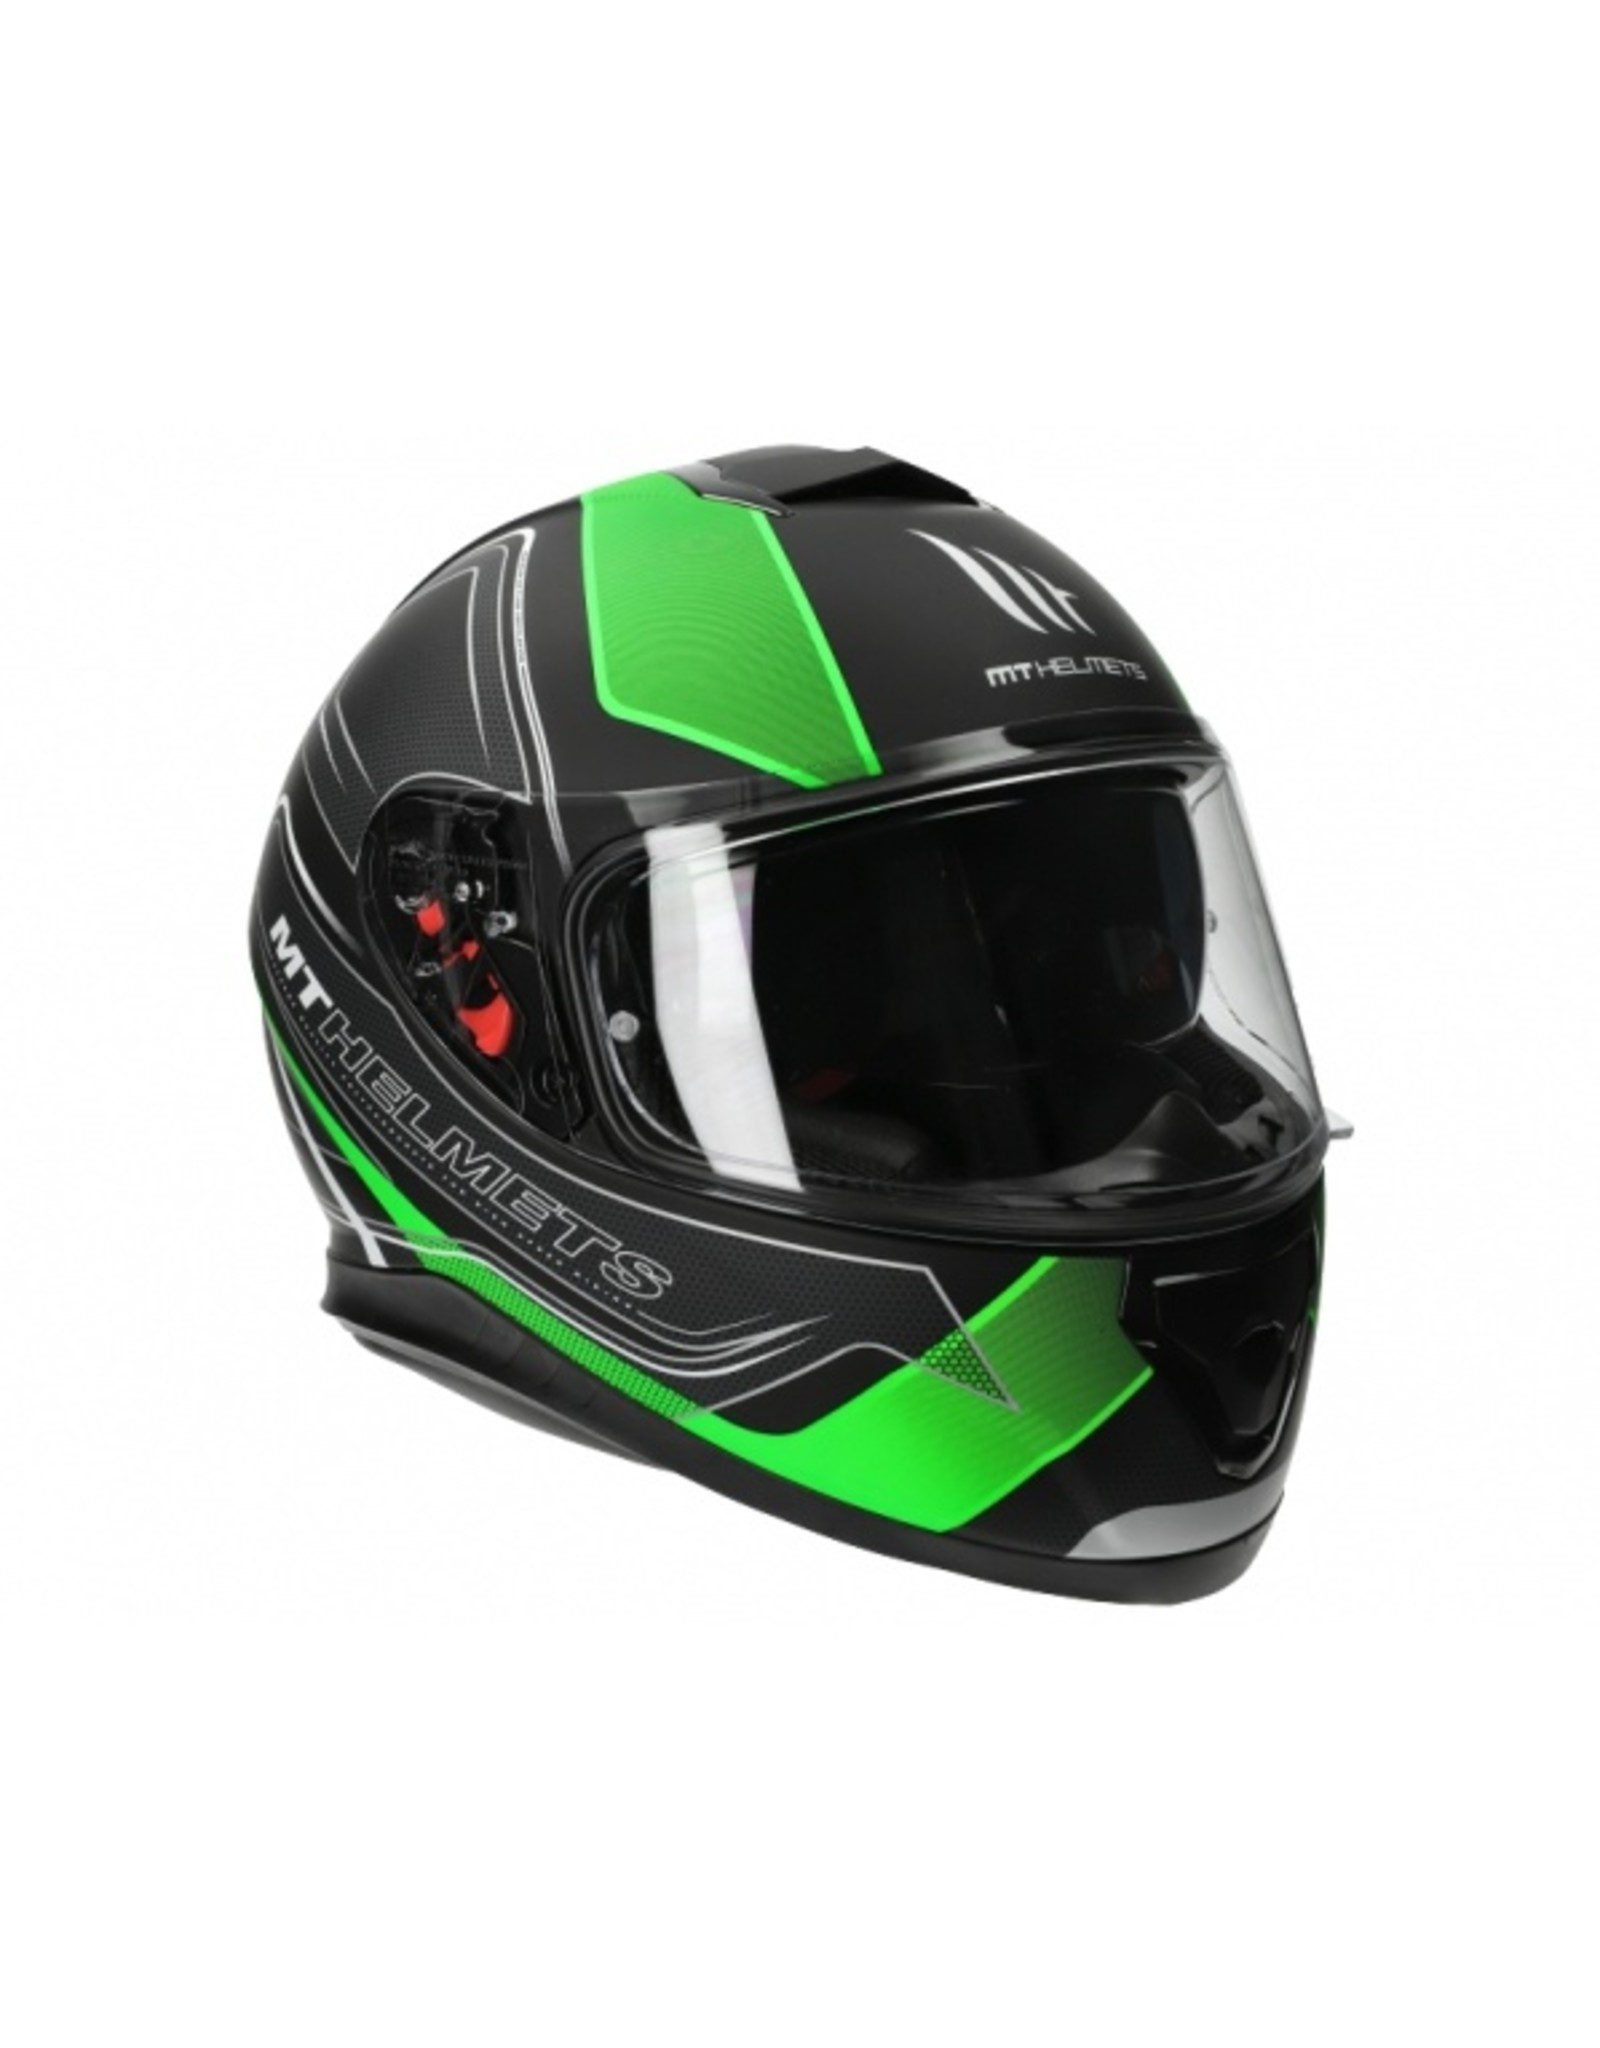 MT Helmets - Motorcycles, Scooters, Helmets, Clothing & Accessories